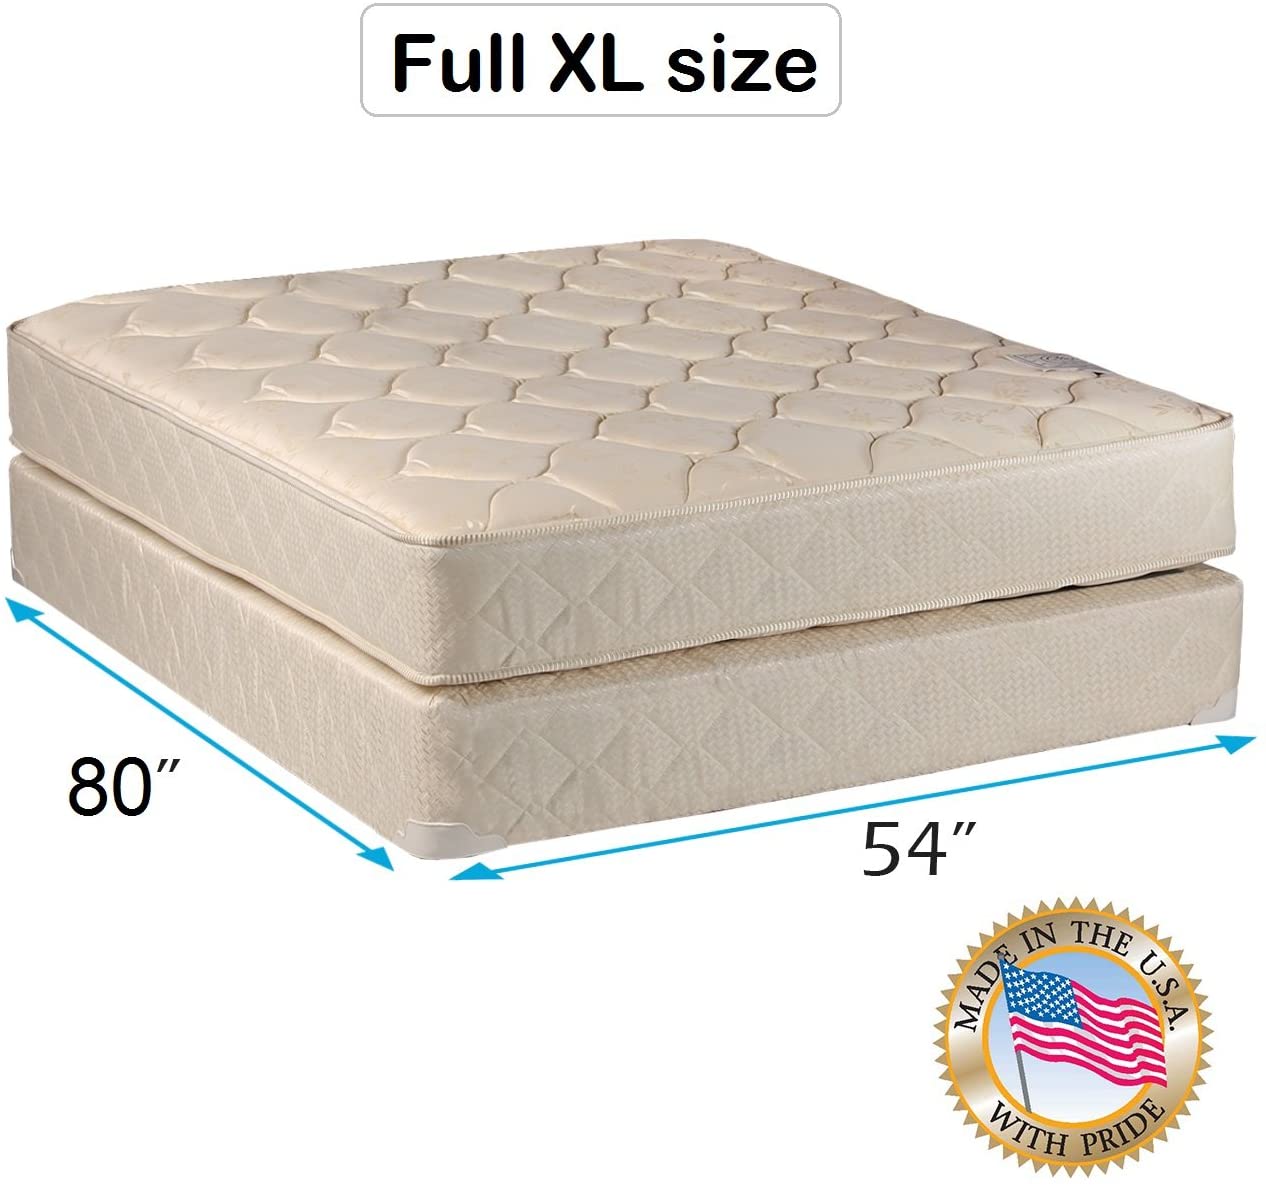 Comfort Classic Gentle Firm Full Extra Long Size Mattress and Box Spring Set - Fully Assembled, Orthopedic, Good for Your Back - Long Lasting and 1 Sided